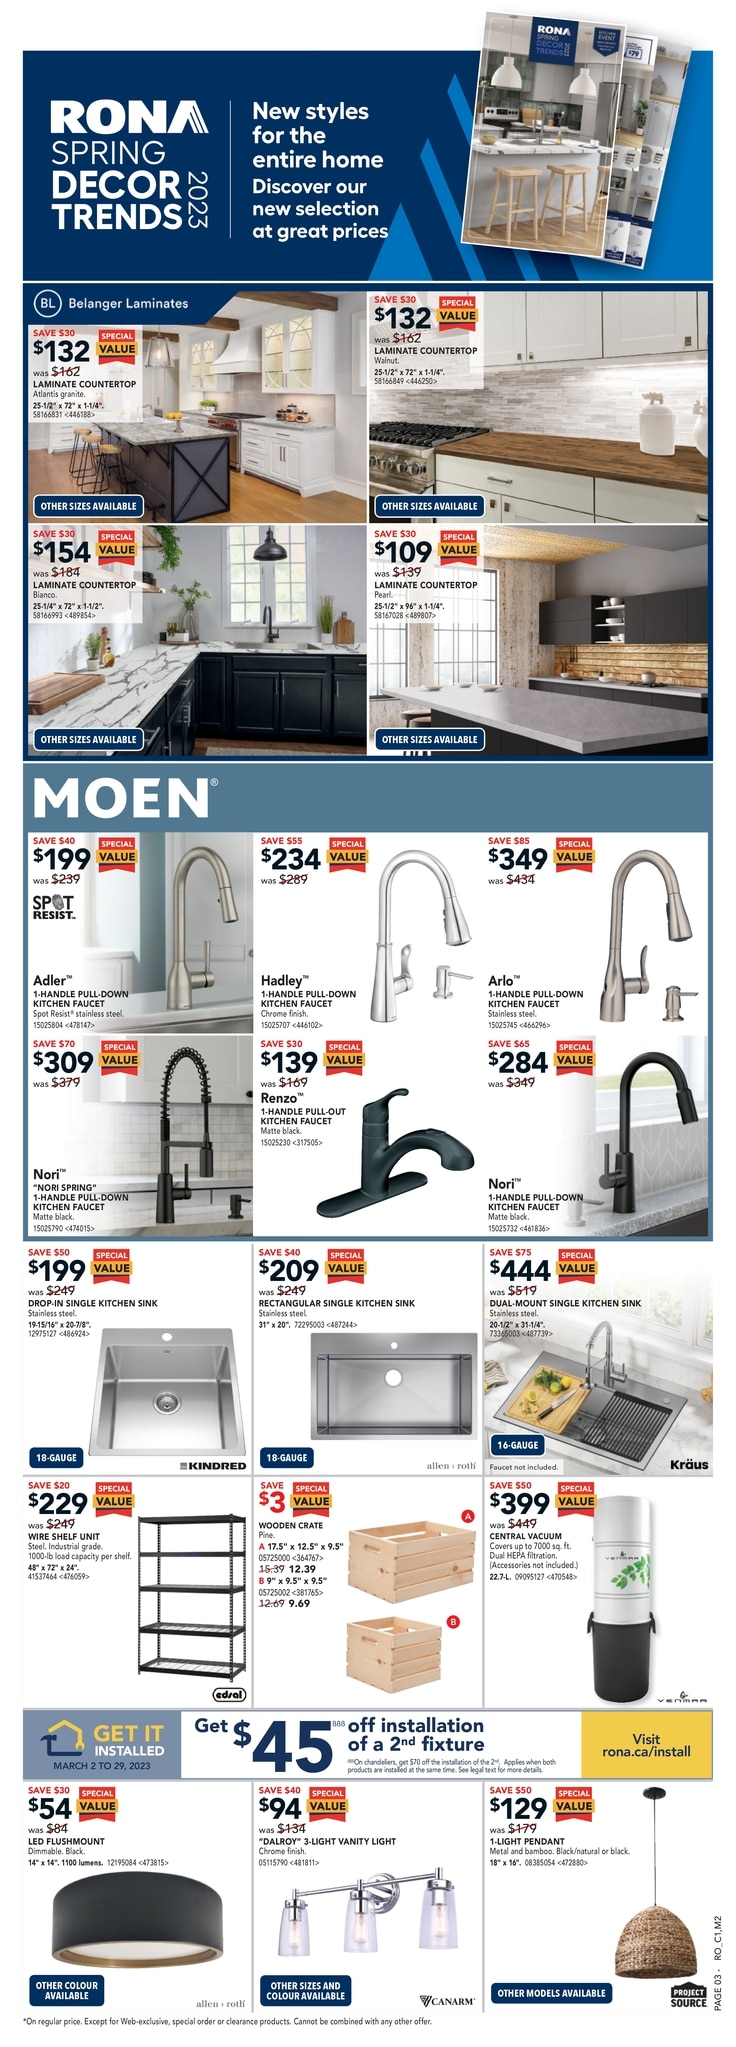 Rona - Weekly Flyer Specials - Page 3